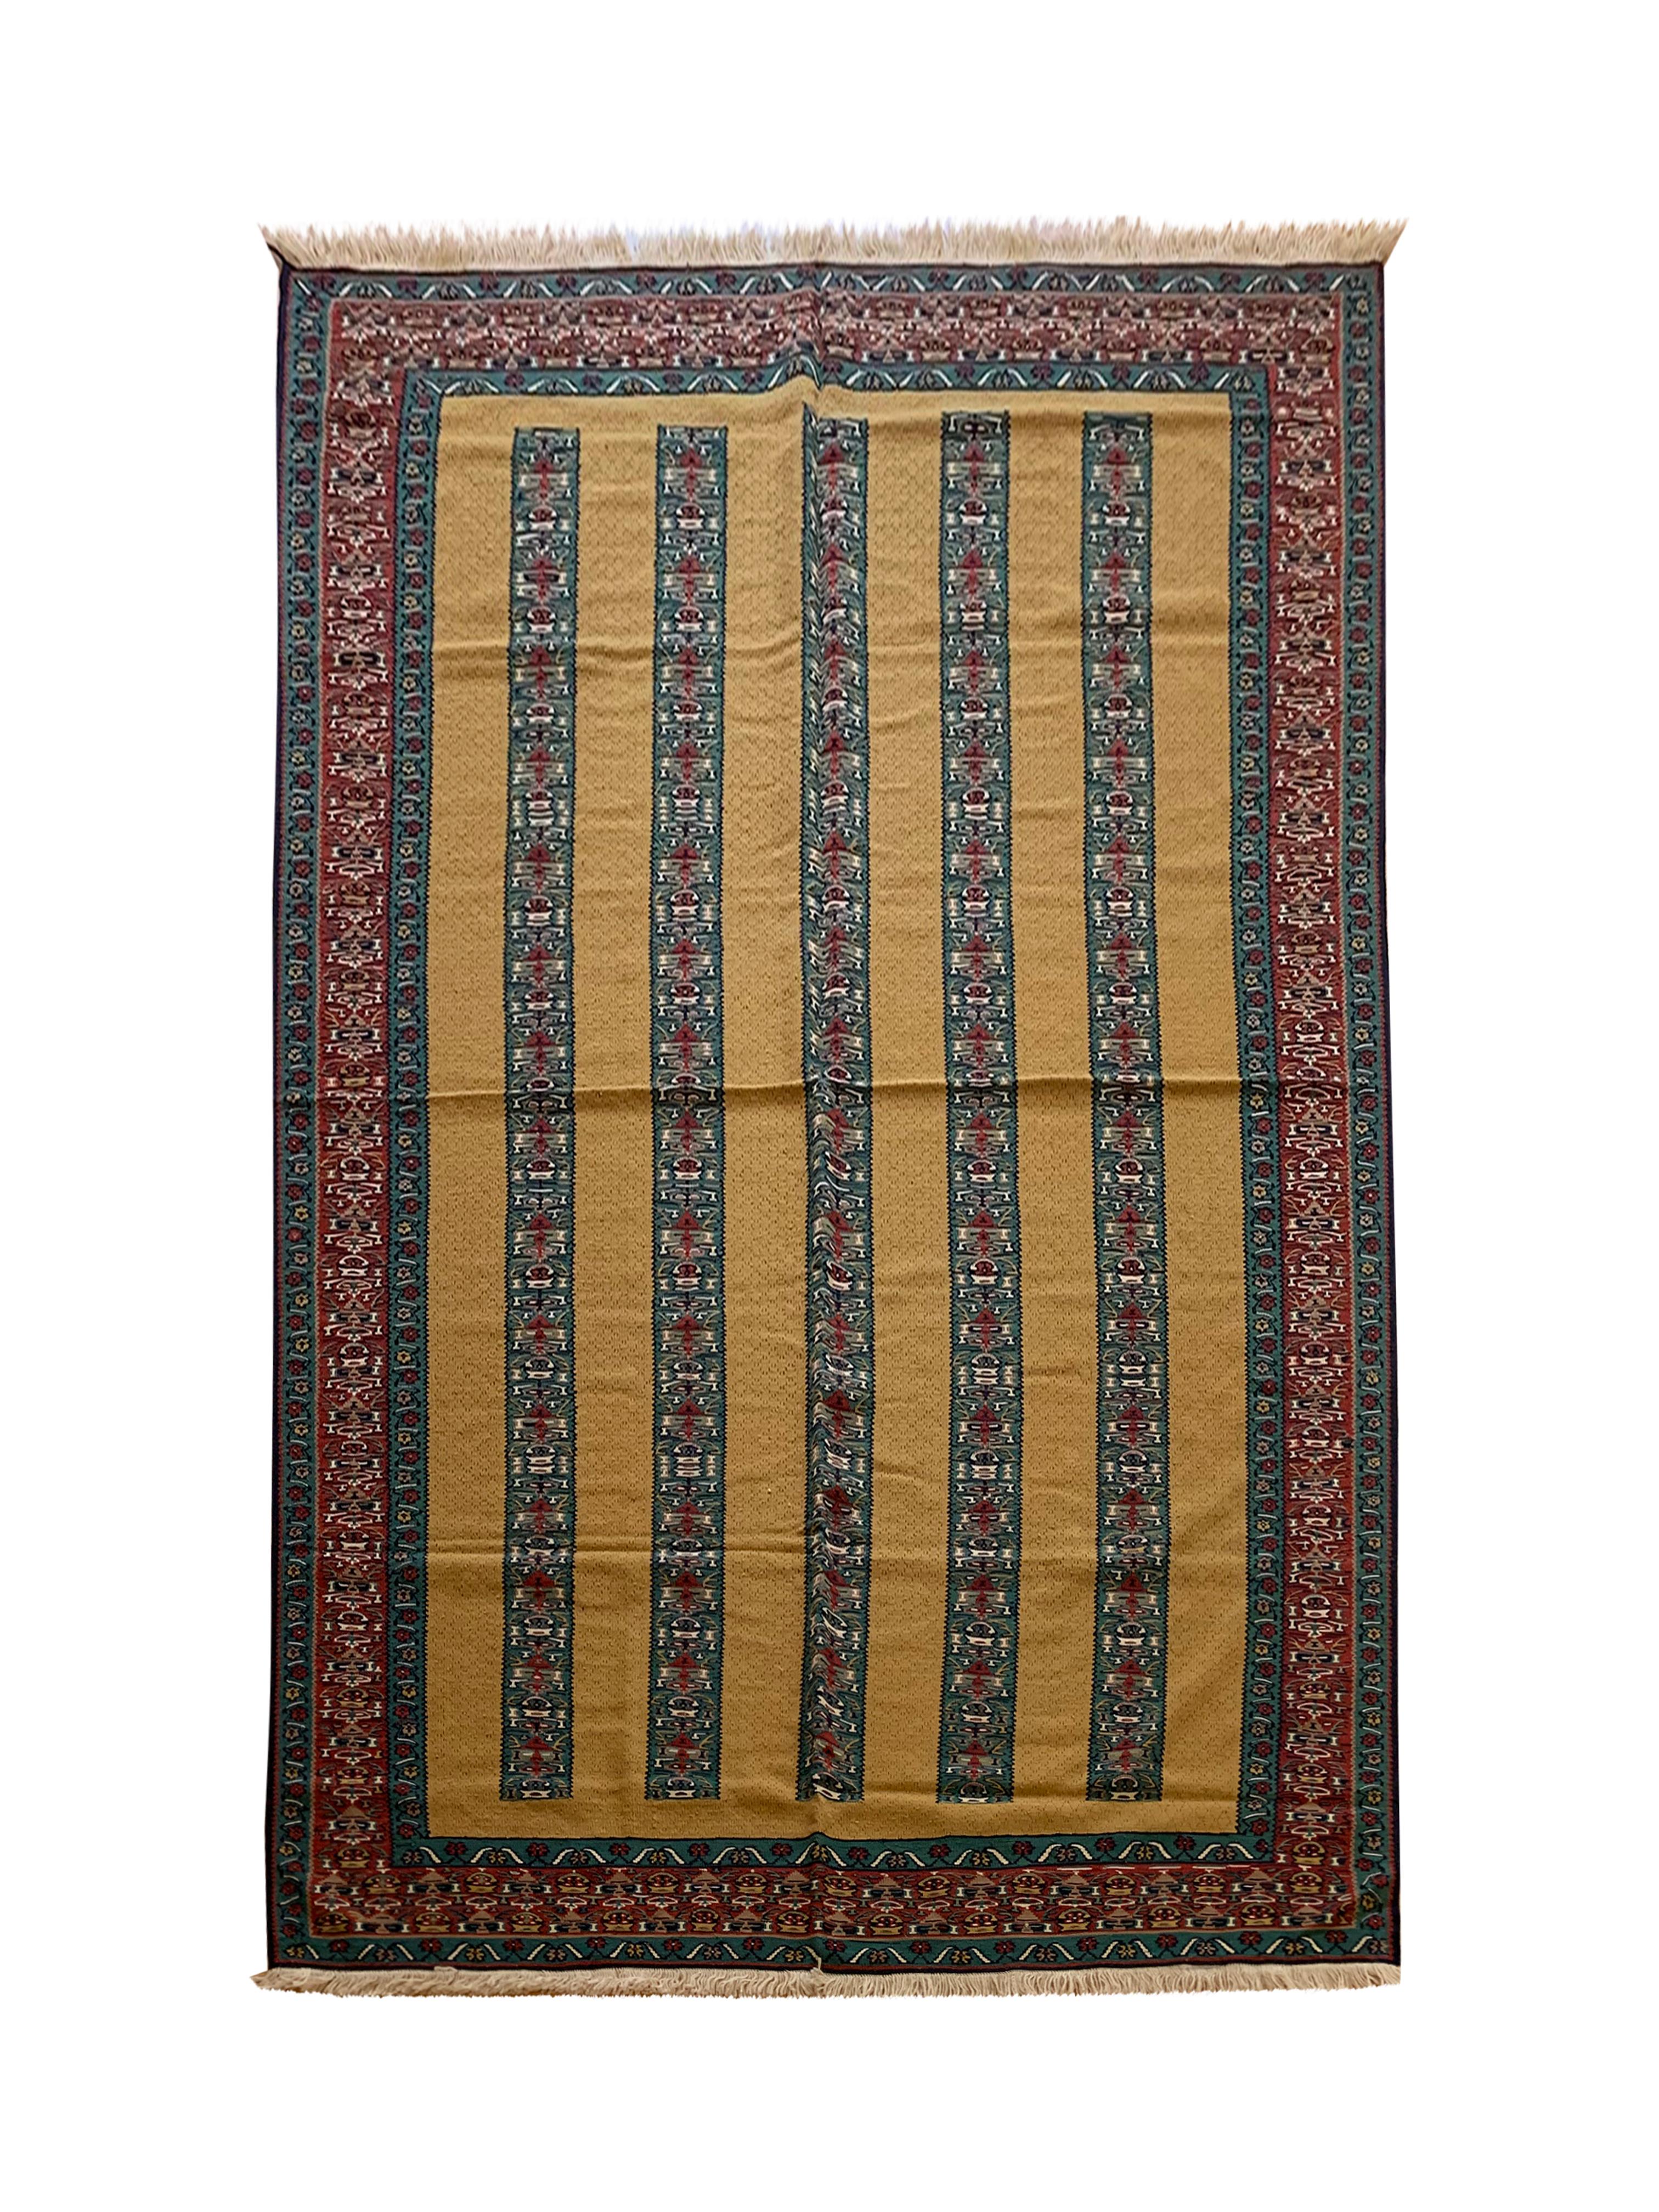 This beautiful pure wool carpet is a handmade, flatwoven kilim woven in the early 21st century, circa 2010. It is unused and so is in excellent condition. The design features a bold medallion design woven on a yellow background with blue, red and